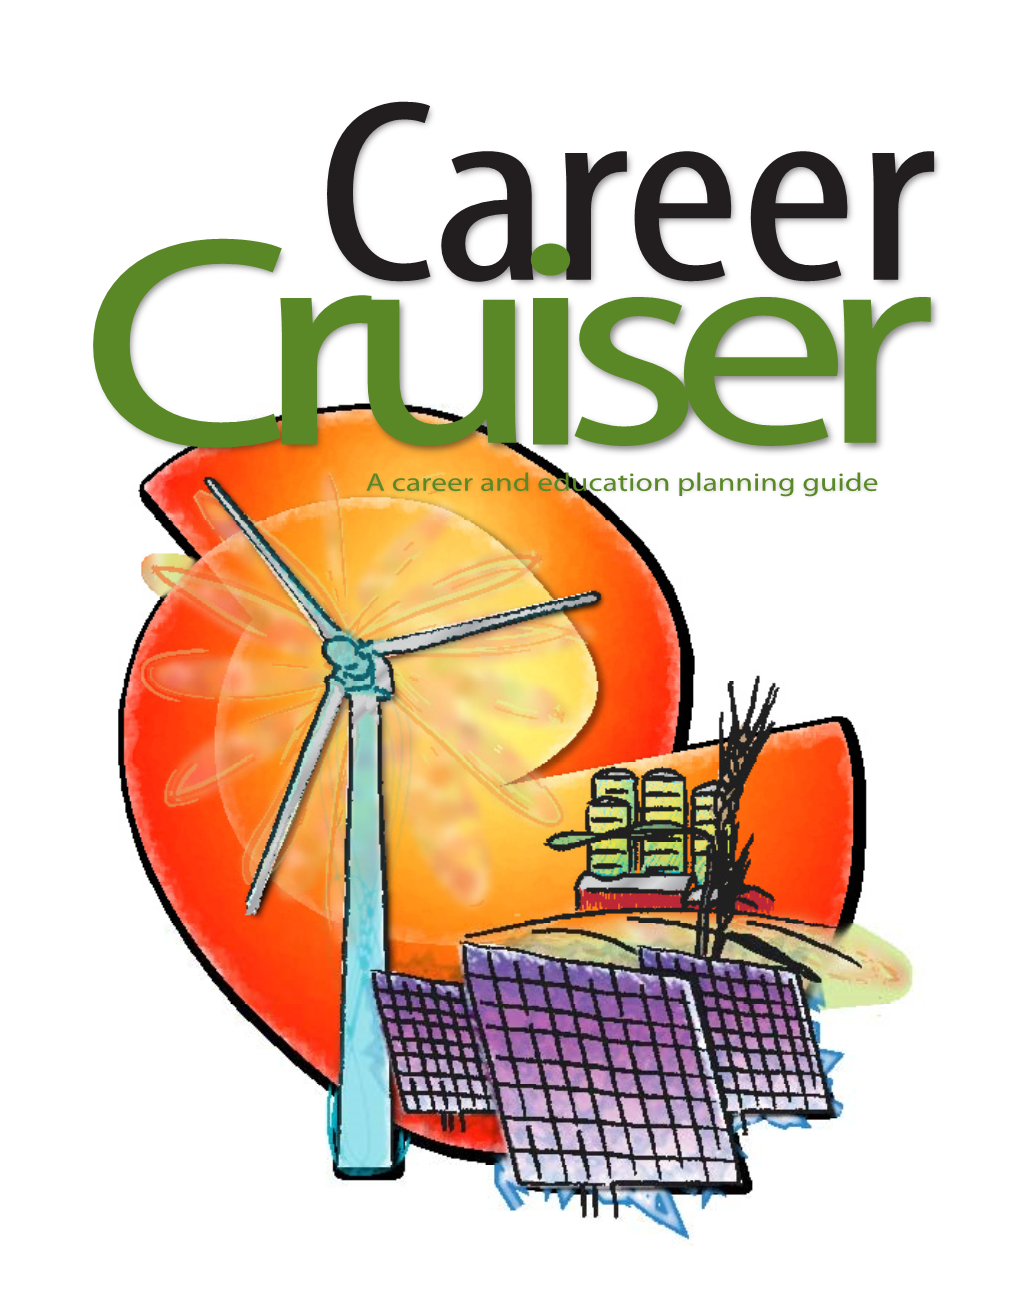 CAREER CRUISER and the TEACHER’S GUIDE May Be Viewed Online At